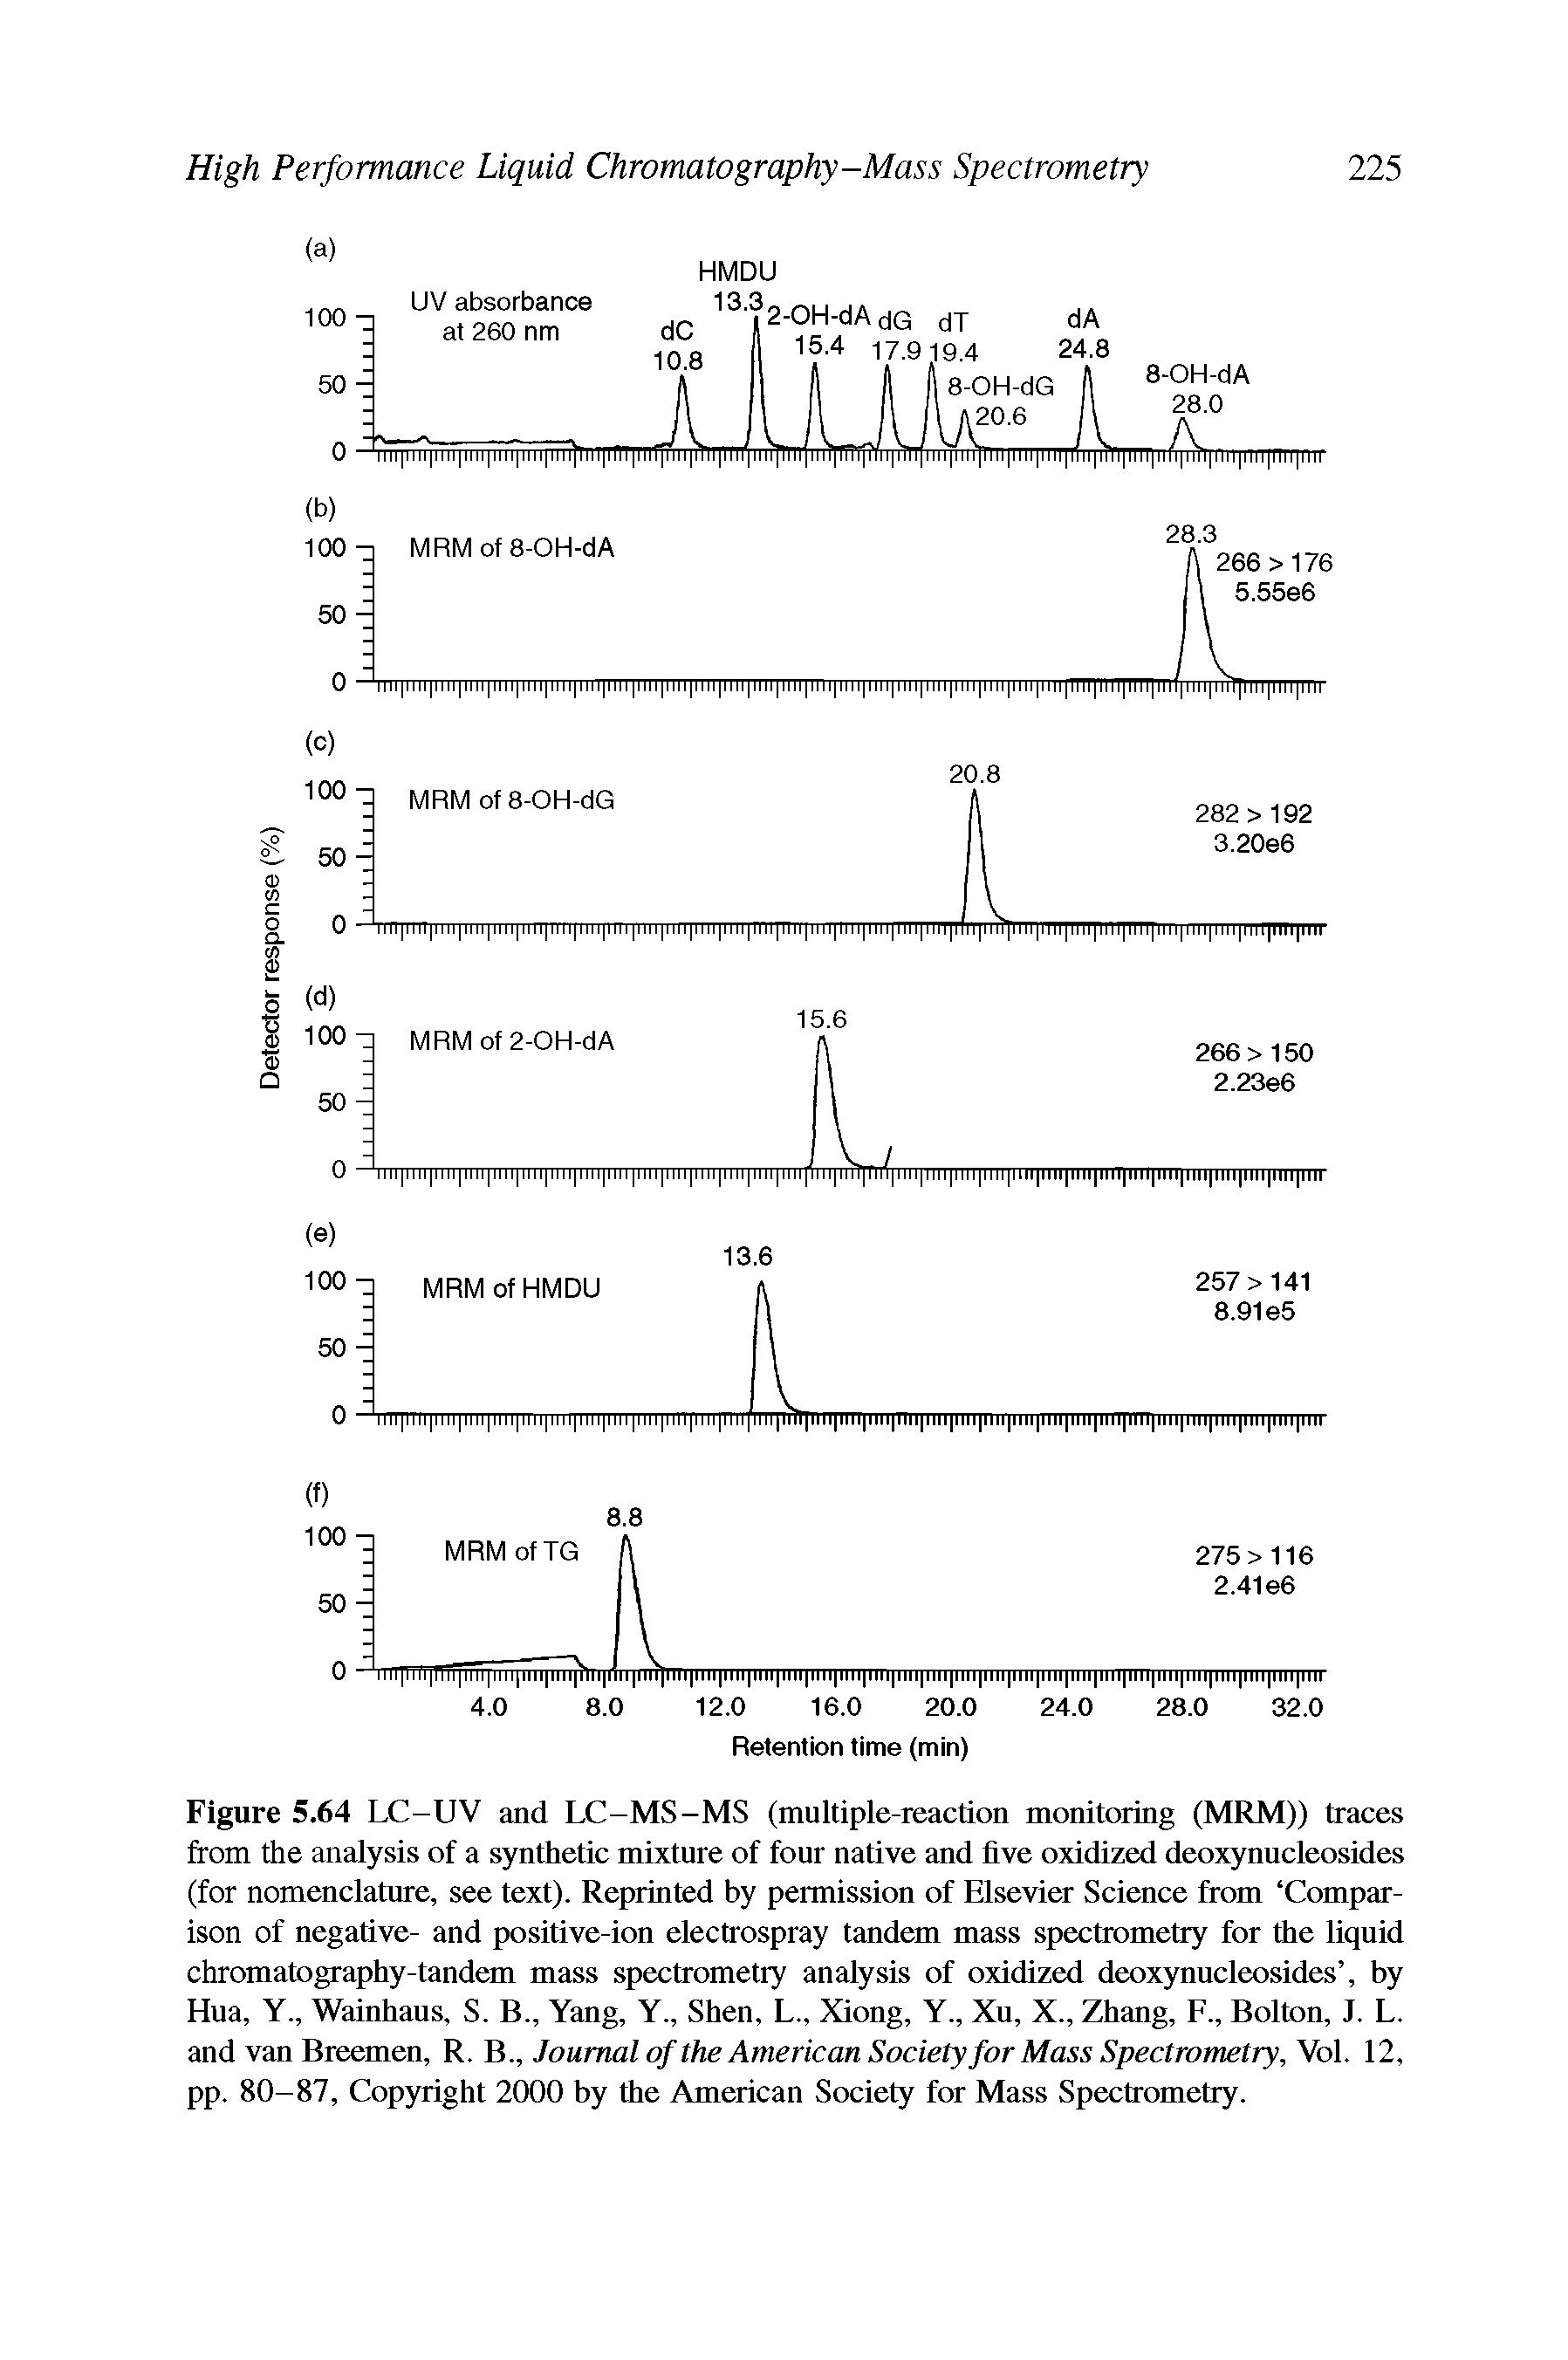 Figure 5.64 LC-UV and LC-MS-MS (multiple-reaction monitoring (MRM)) traces from the analysis of a synthetic mixture of four native and five oxidized deoxynucleosides (for nomenclature, see text). Reprinted by permission of Elsevier Science from Comparison of negative- and positive-ion electrospray tandem mass spectrometry for the liquid chromalography-landem mass speclrometry analysis of oxidized deoxynucleosides , by Hua, Y., Wainhaus, S. B., Yang, Y., Shen, L., Xiong, Y., Xu, X., Zhang, F., Bolton, J. L. and van Breemen, R. B., Journal of the American Society for Mass Spectrometry, Vol. 12, pp. 80-87, Copyrighl 2000 by Ihe American Society for Mass Spectrometry.